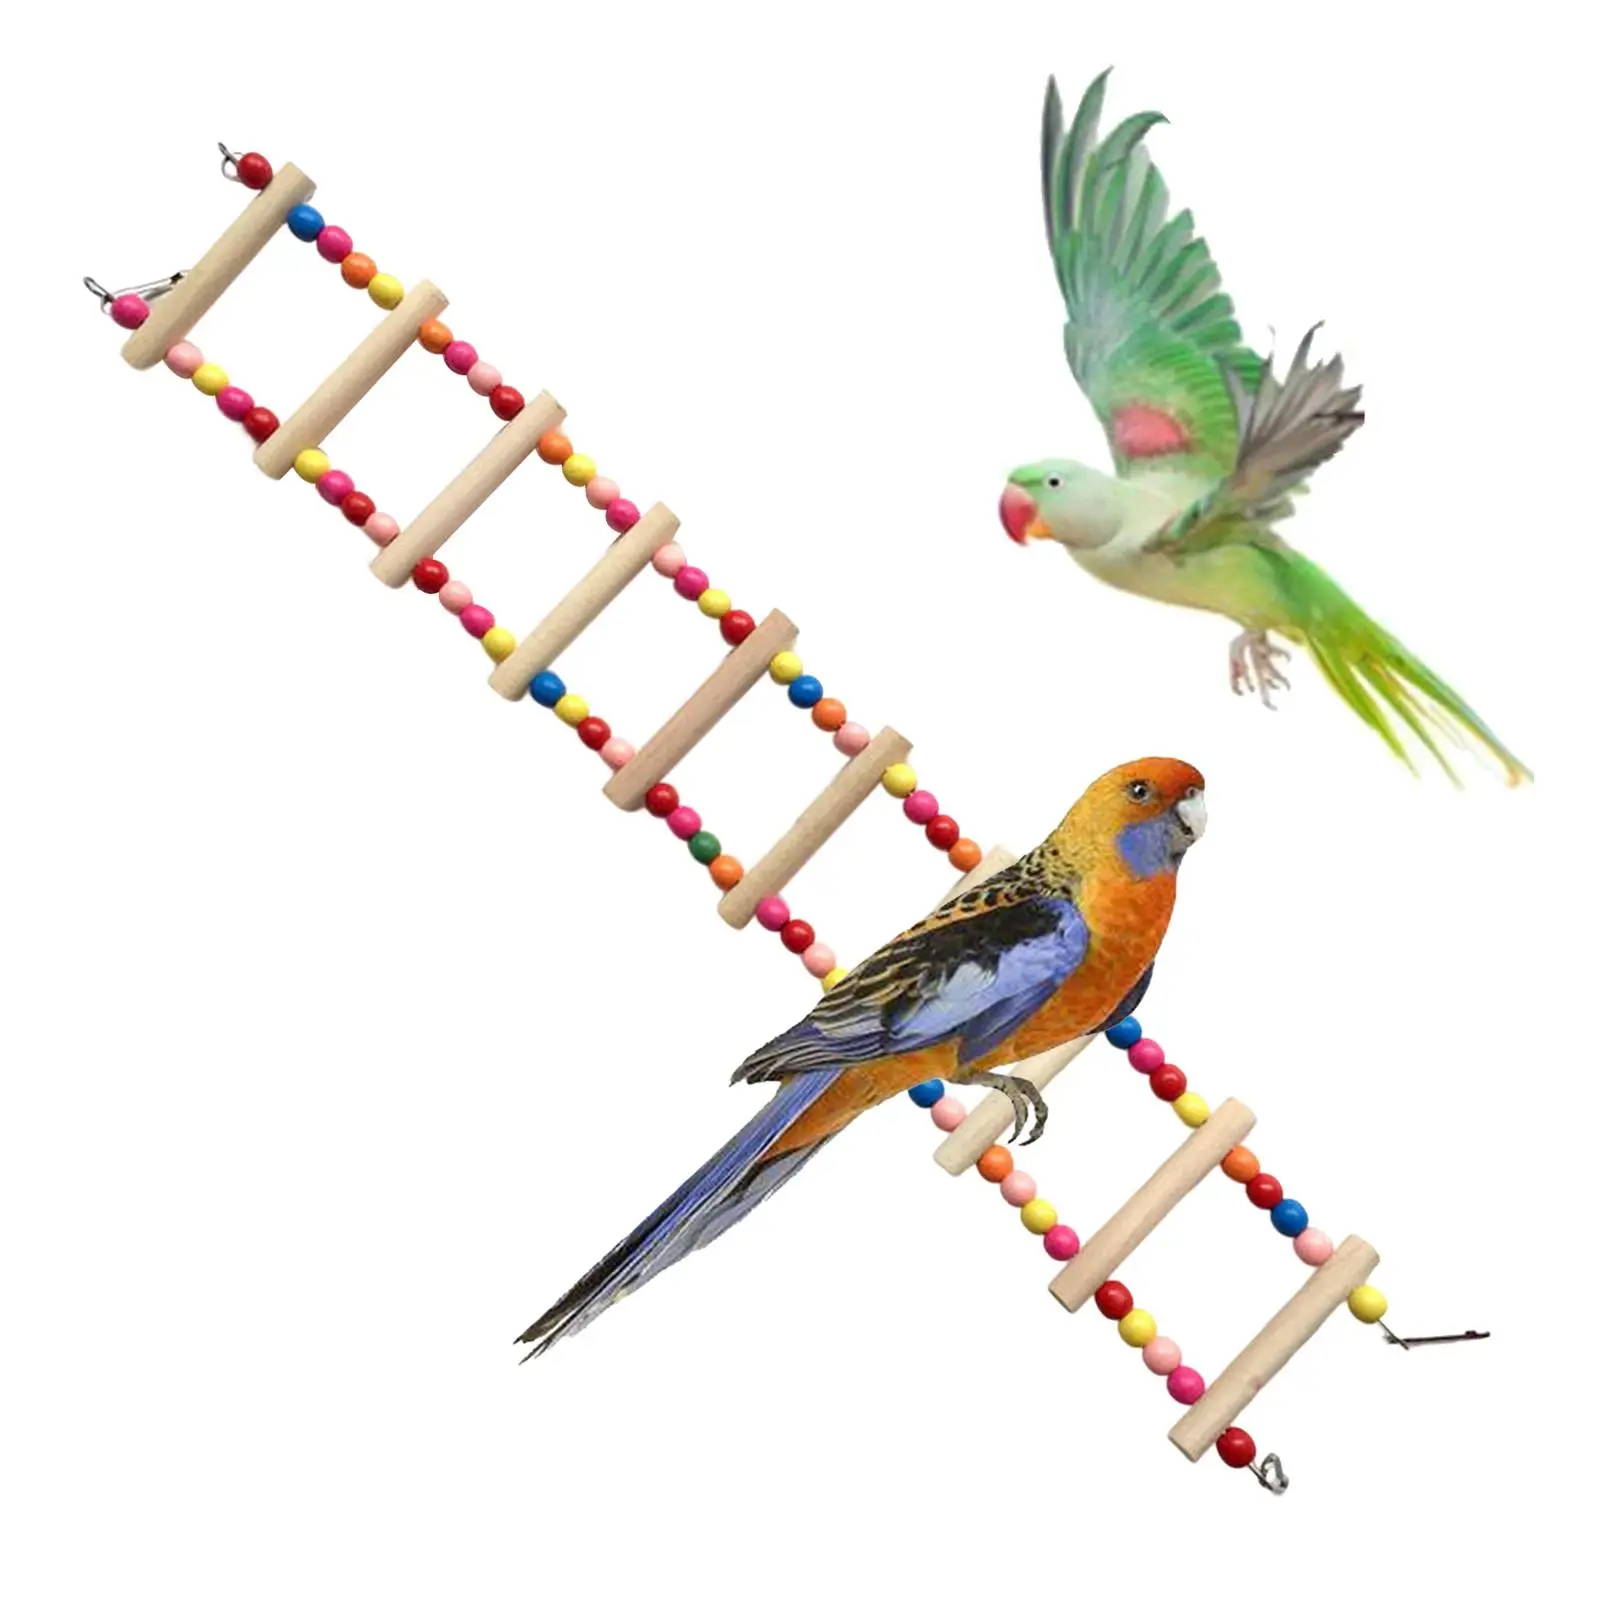 Multicolor Bird Ladder Parrots Swing Climbing Encourages Foot Exercise for Cockatiels Perch Budgie